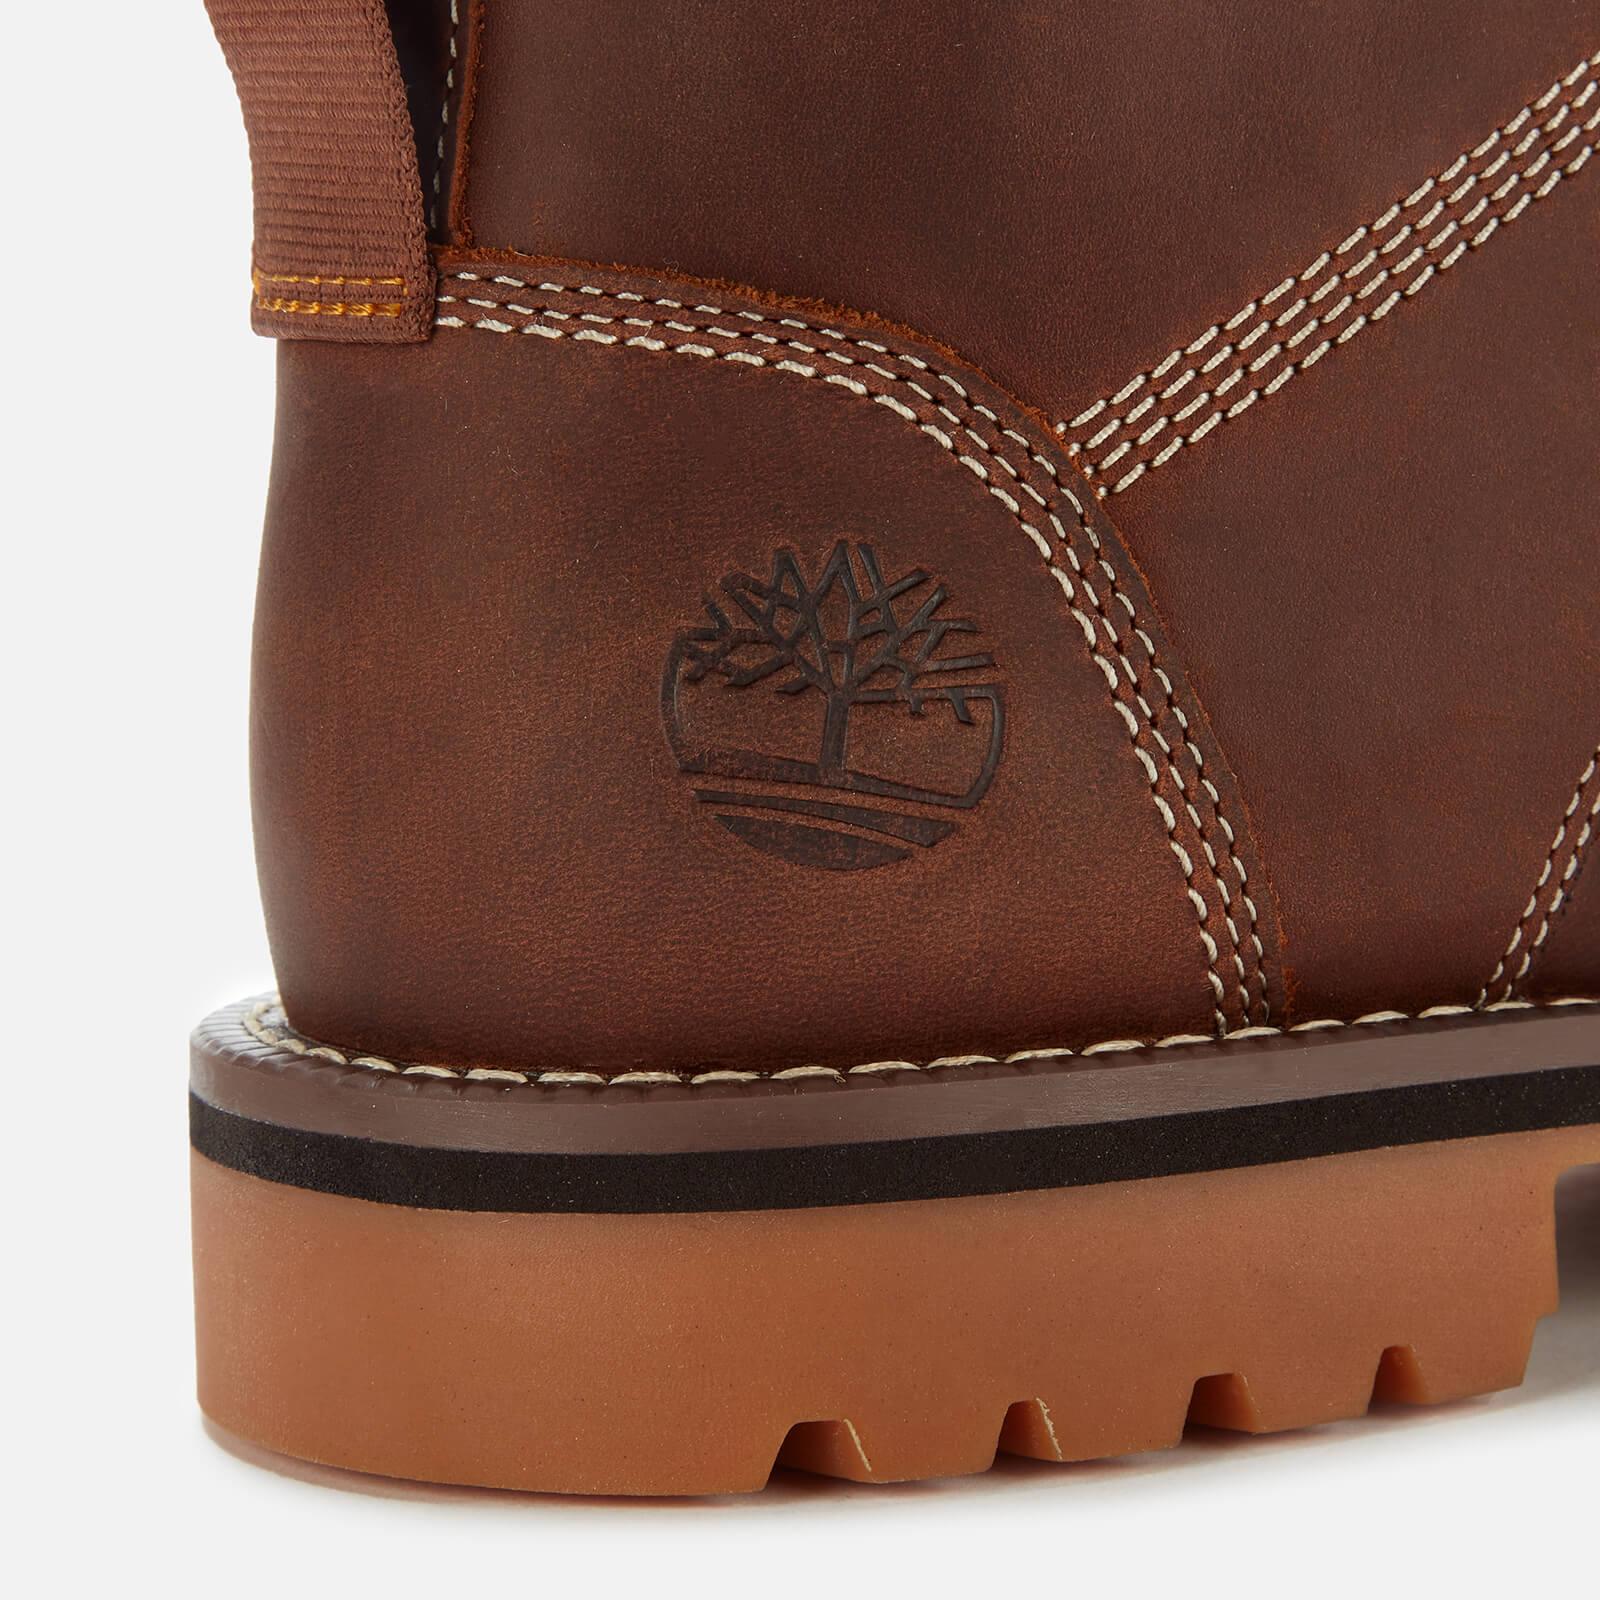 Timberland Larchmont Ii Leather Chukka Boots in Brown for Men | Lyst